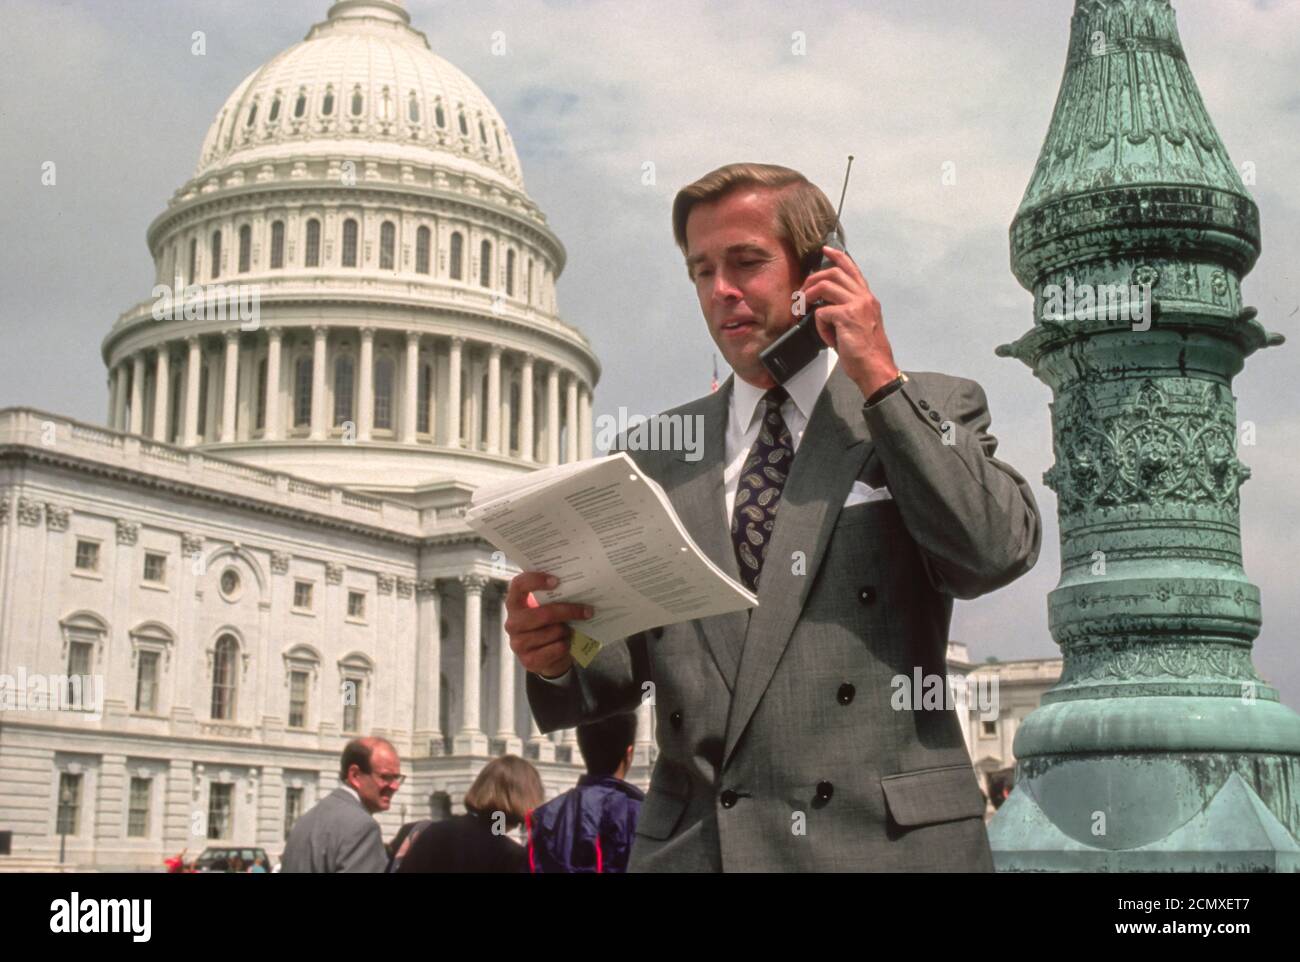 WASHINGTON, DC, USA - Lobbyist with mobile phone in front of U.S. Capitol building 1990s. Stock Photo